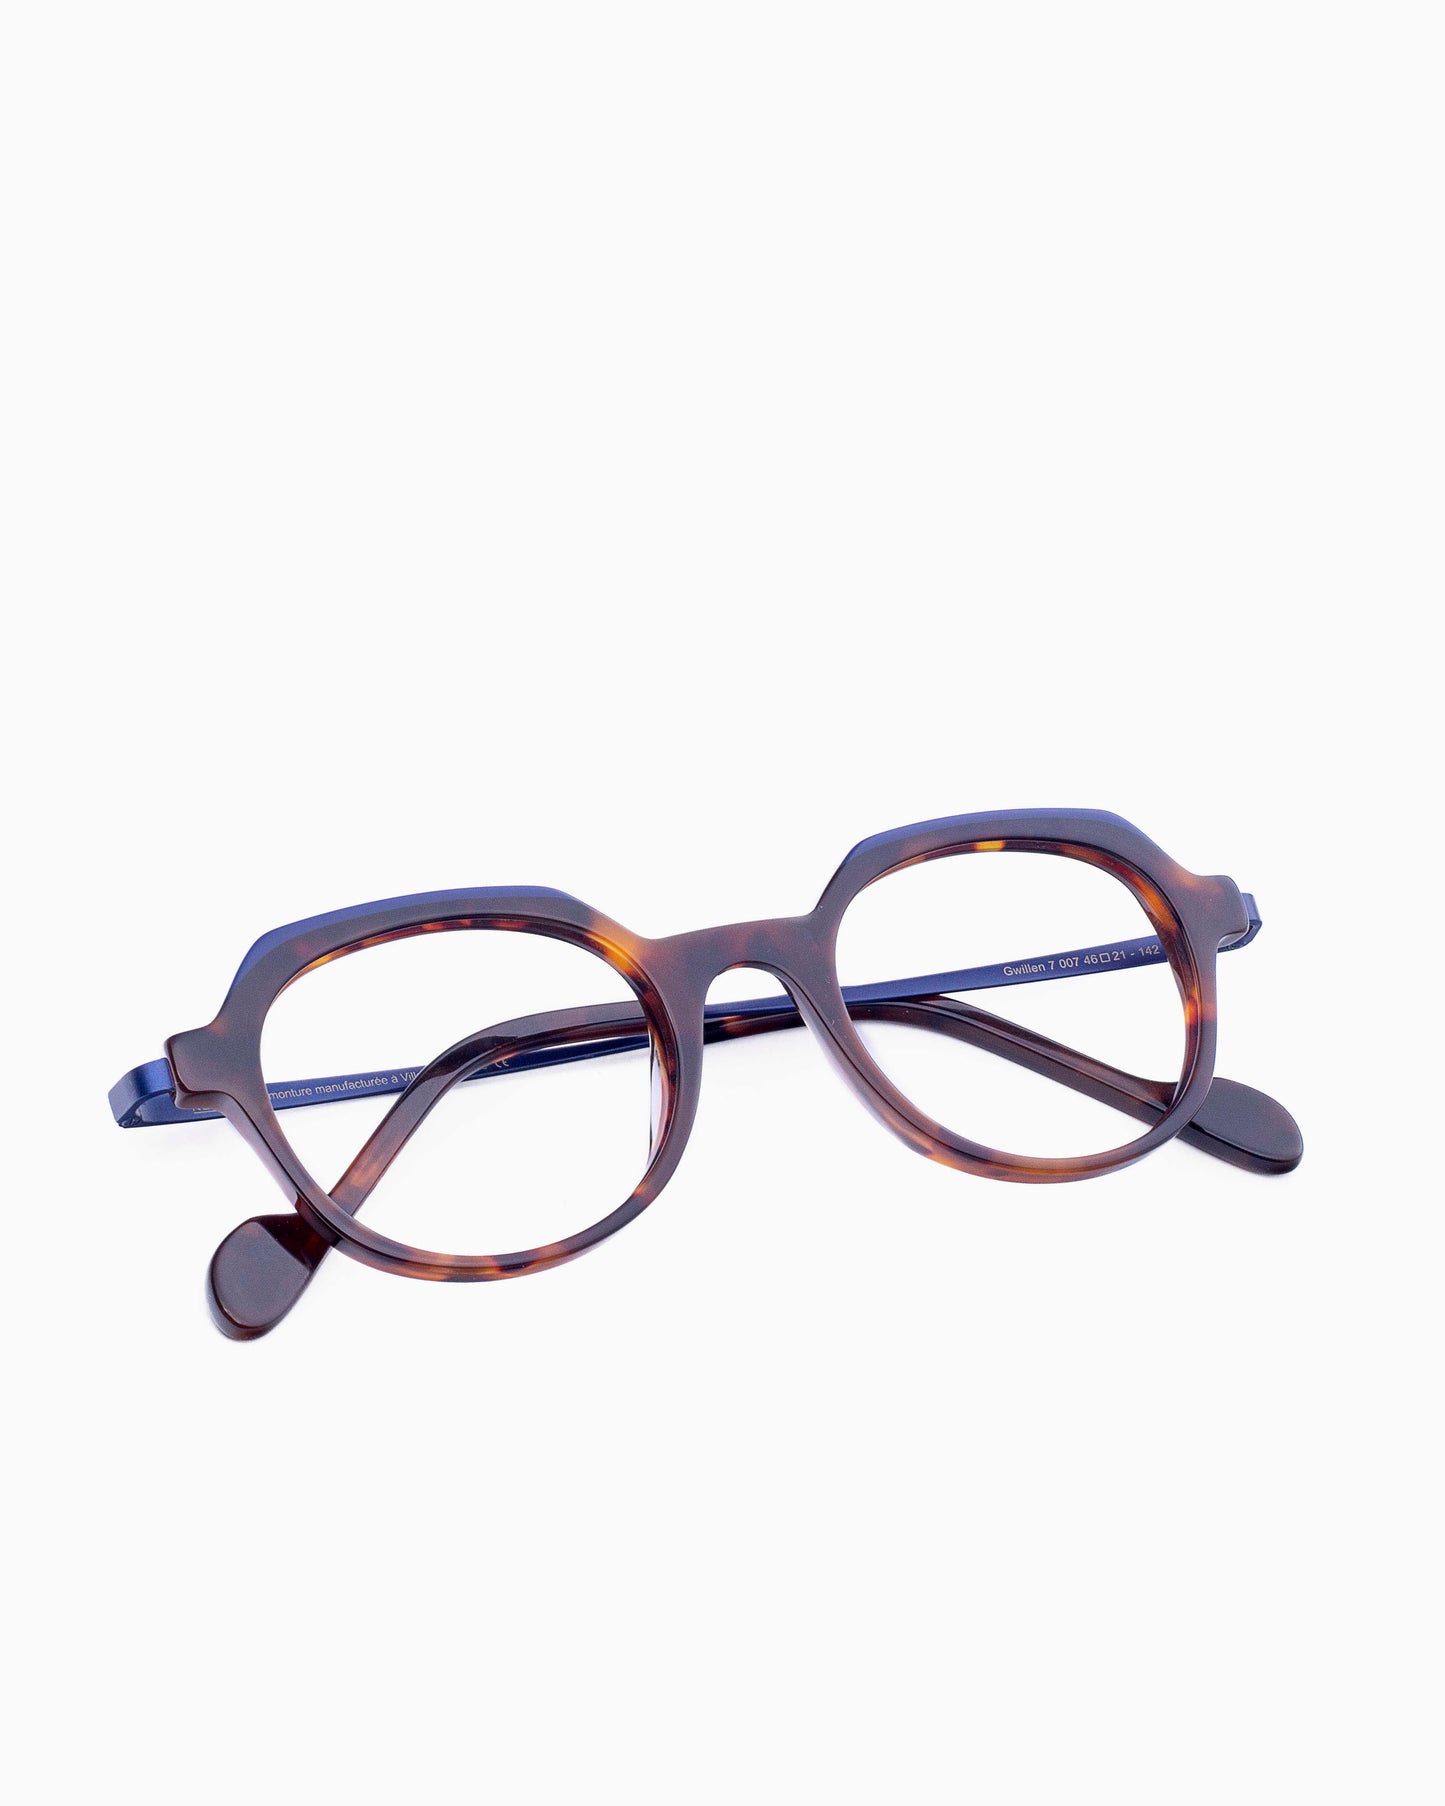 Nao Ned - Gwillen - 7007 | glasses bar